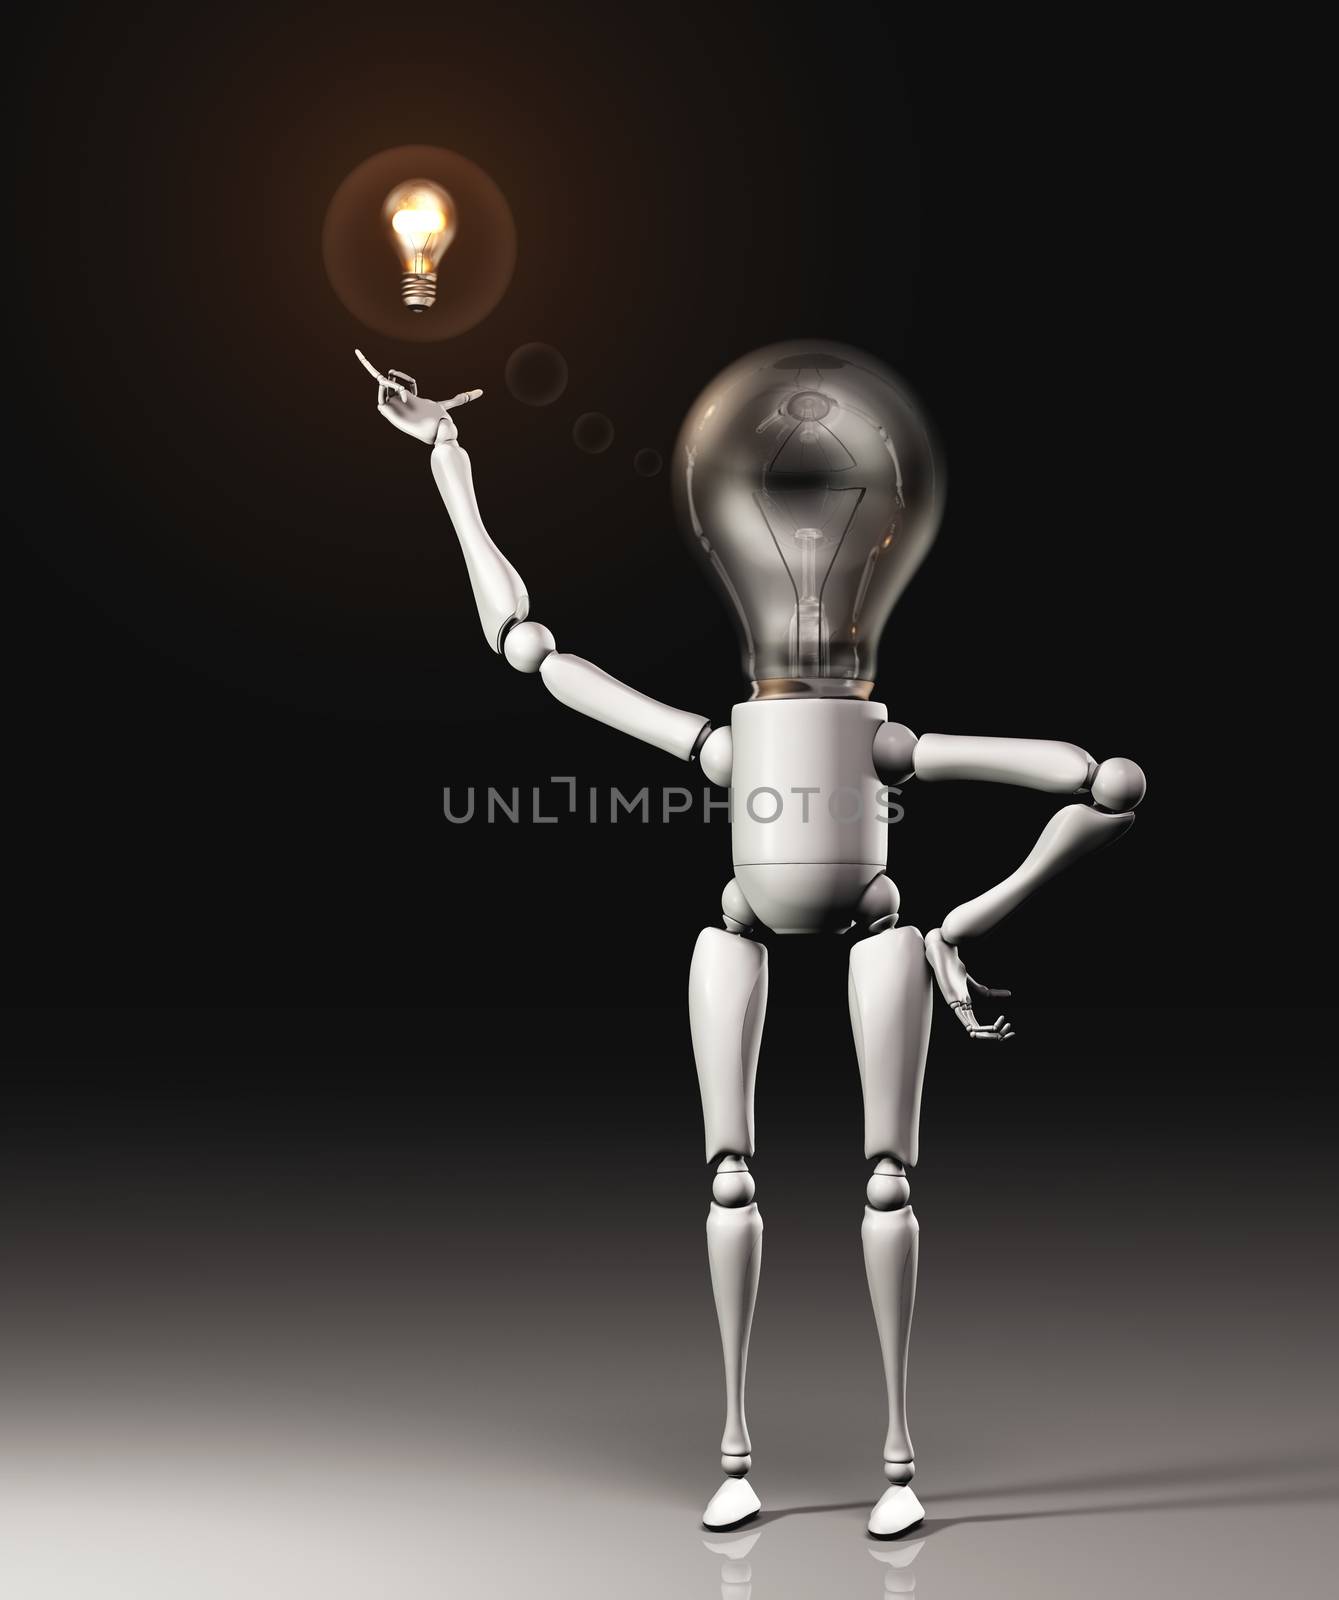 a standing lamp character shows the concept of a new idea, or solution to a problem, by a floating light bulb turned on placed over his upward right hand on a dark background